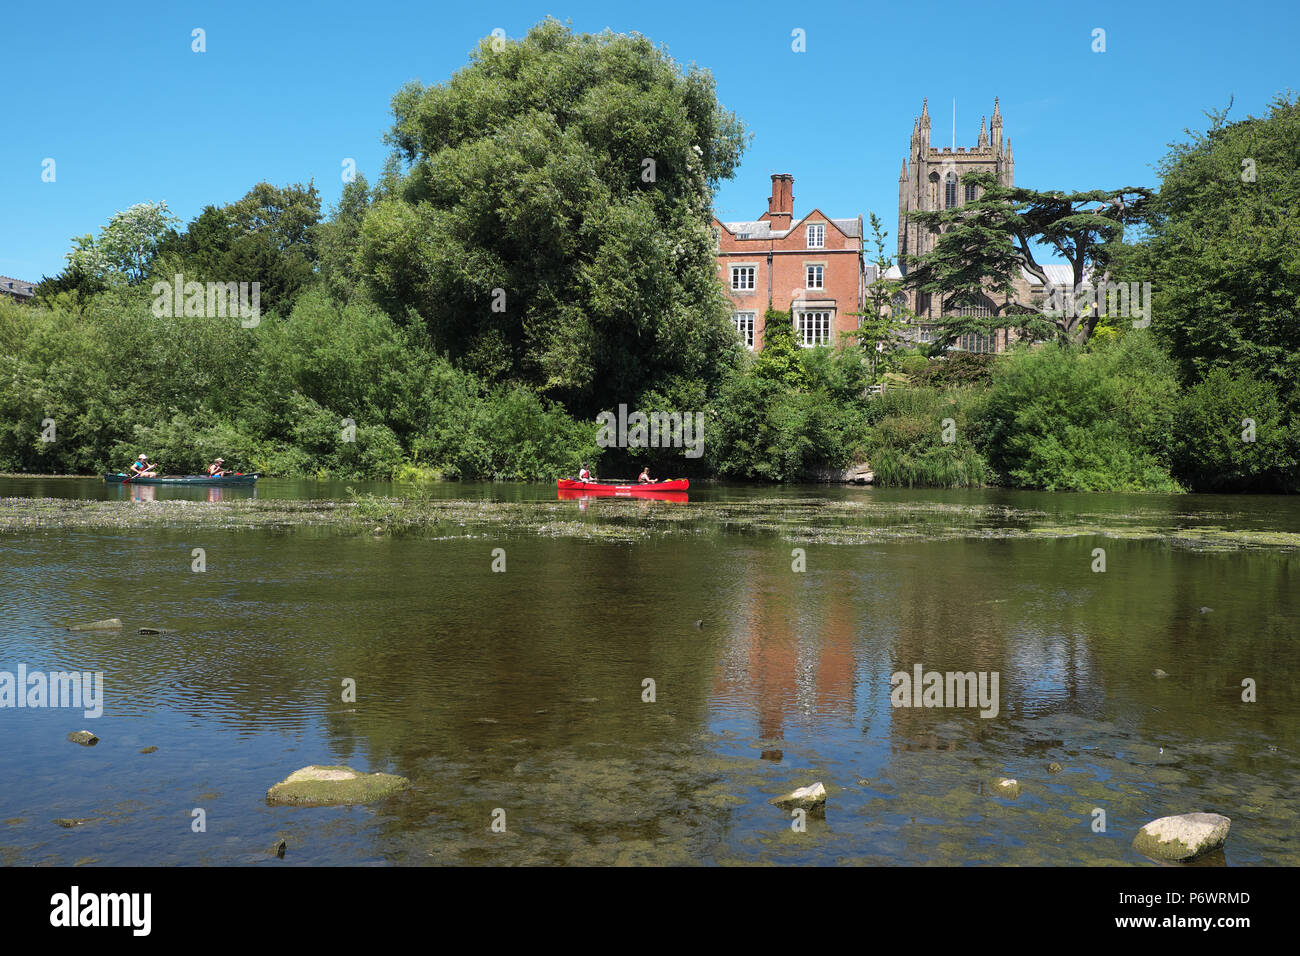 River Wye, Hereford, Herefordshire, UK - Tuesday 3rd July 2018 - After weeks of little or no rain the river level of the River Wye as it passes through Hereford was recorded as just 20cm this morning barely enough even for canoes - Photo Steven May / Alamy Live News Stock Photo